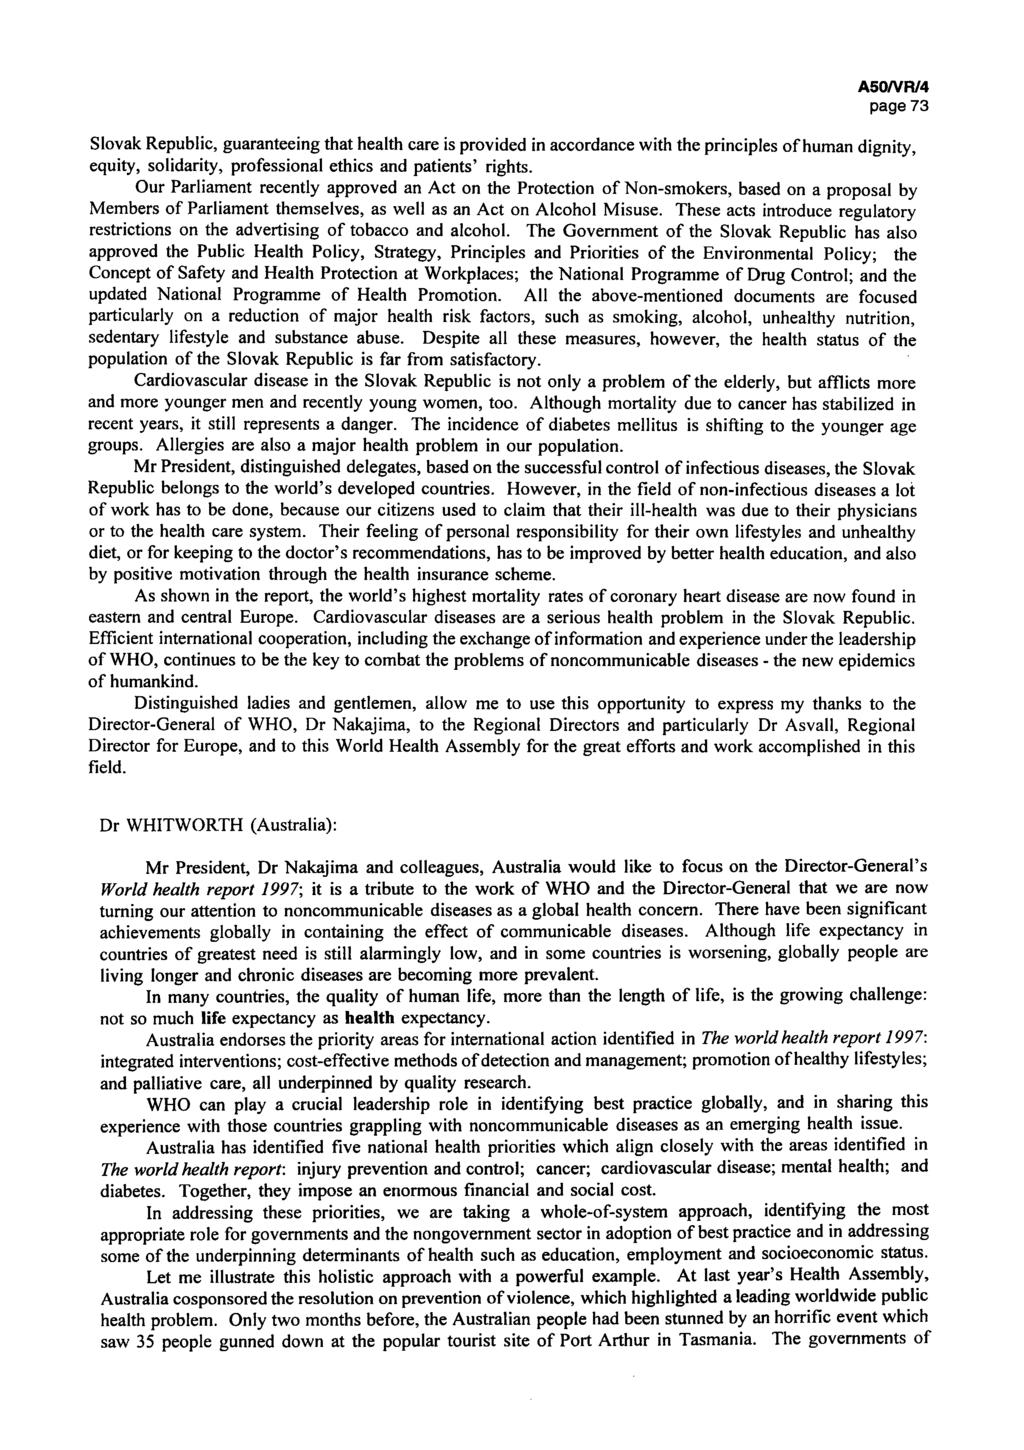 A50/VR/5 page 73 Slovak Republic, guaranteeing that health care is provided in accordance with the principles of human dignity, equity, solidarity, professional ethics and patients' rights.